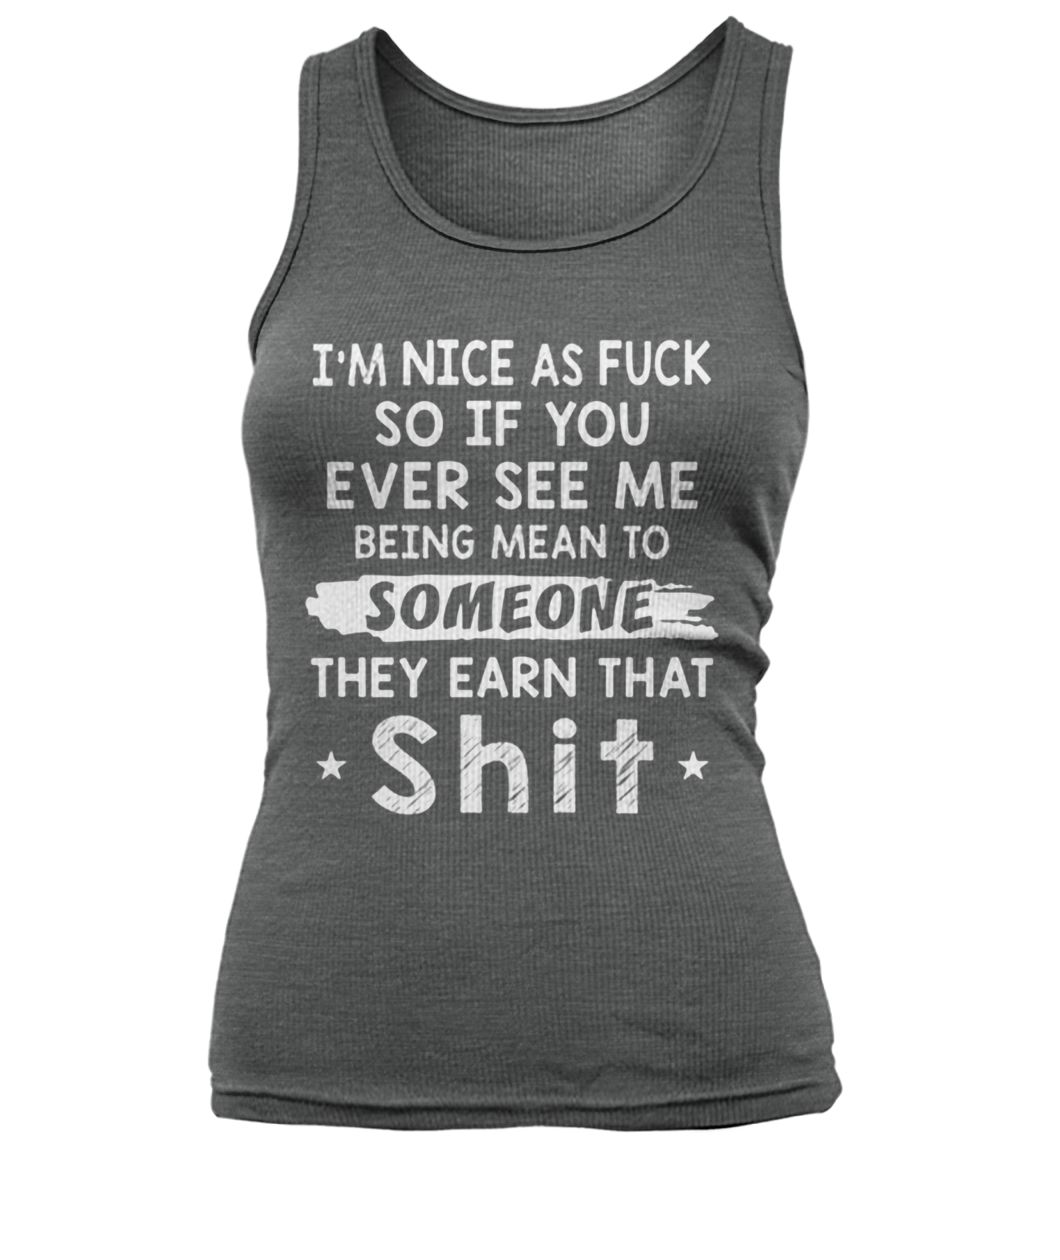 I’m nice as fuck so if you ever see me being mean to someone they earned that shit women's tank top